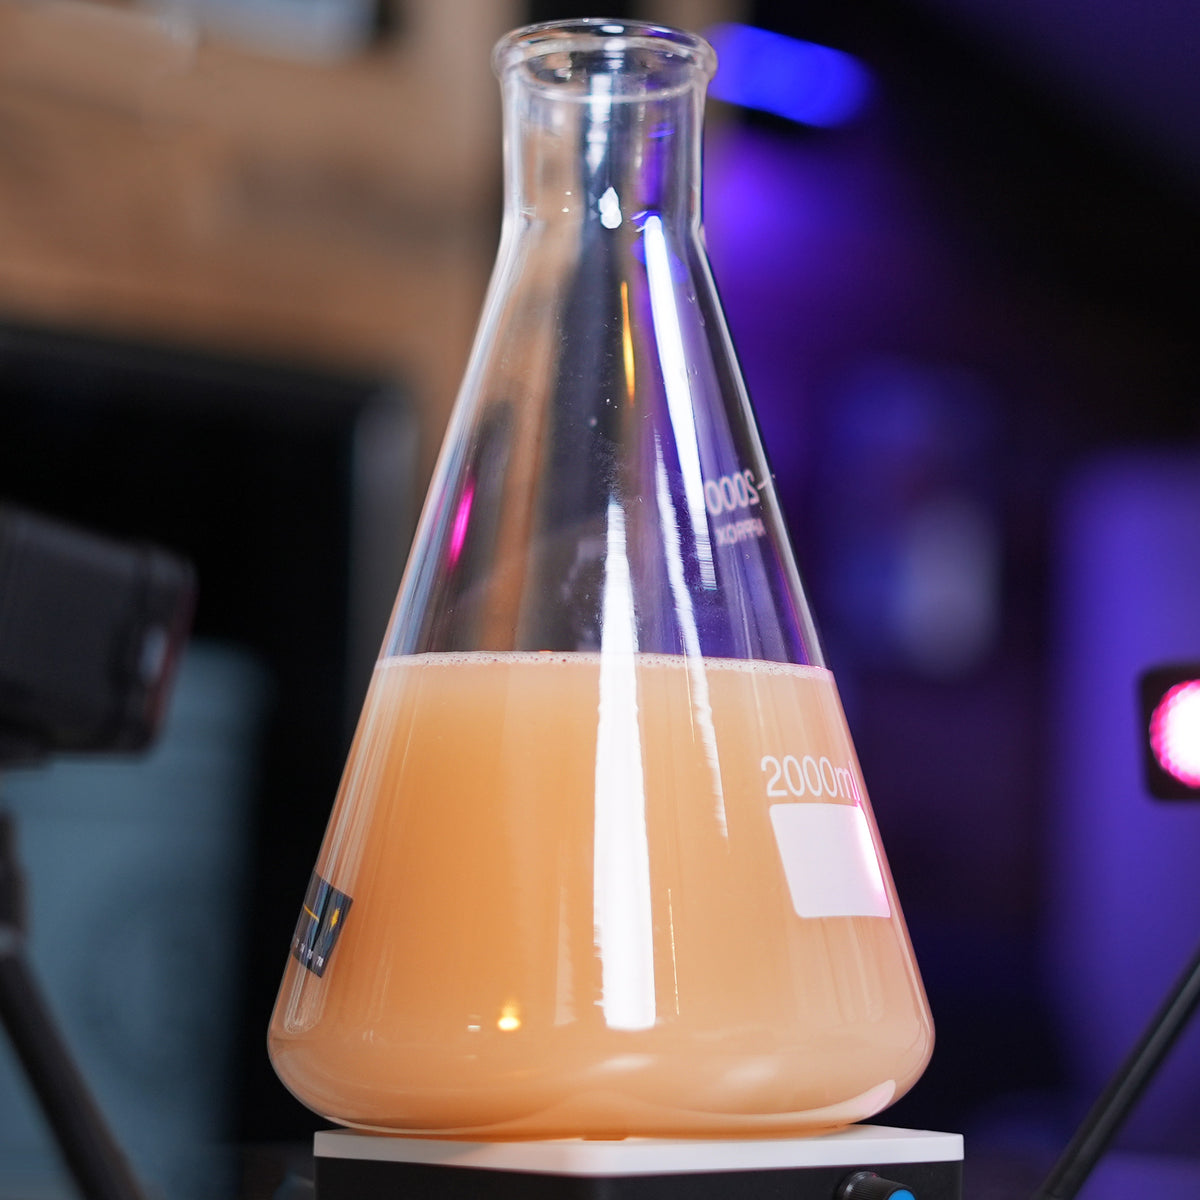 How to Make a Yeast Starter